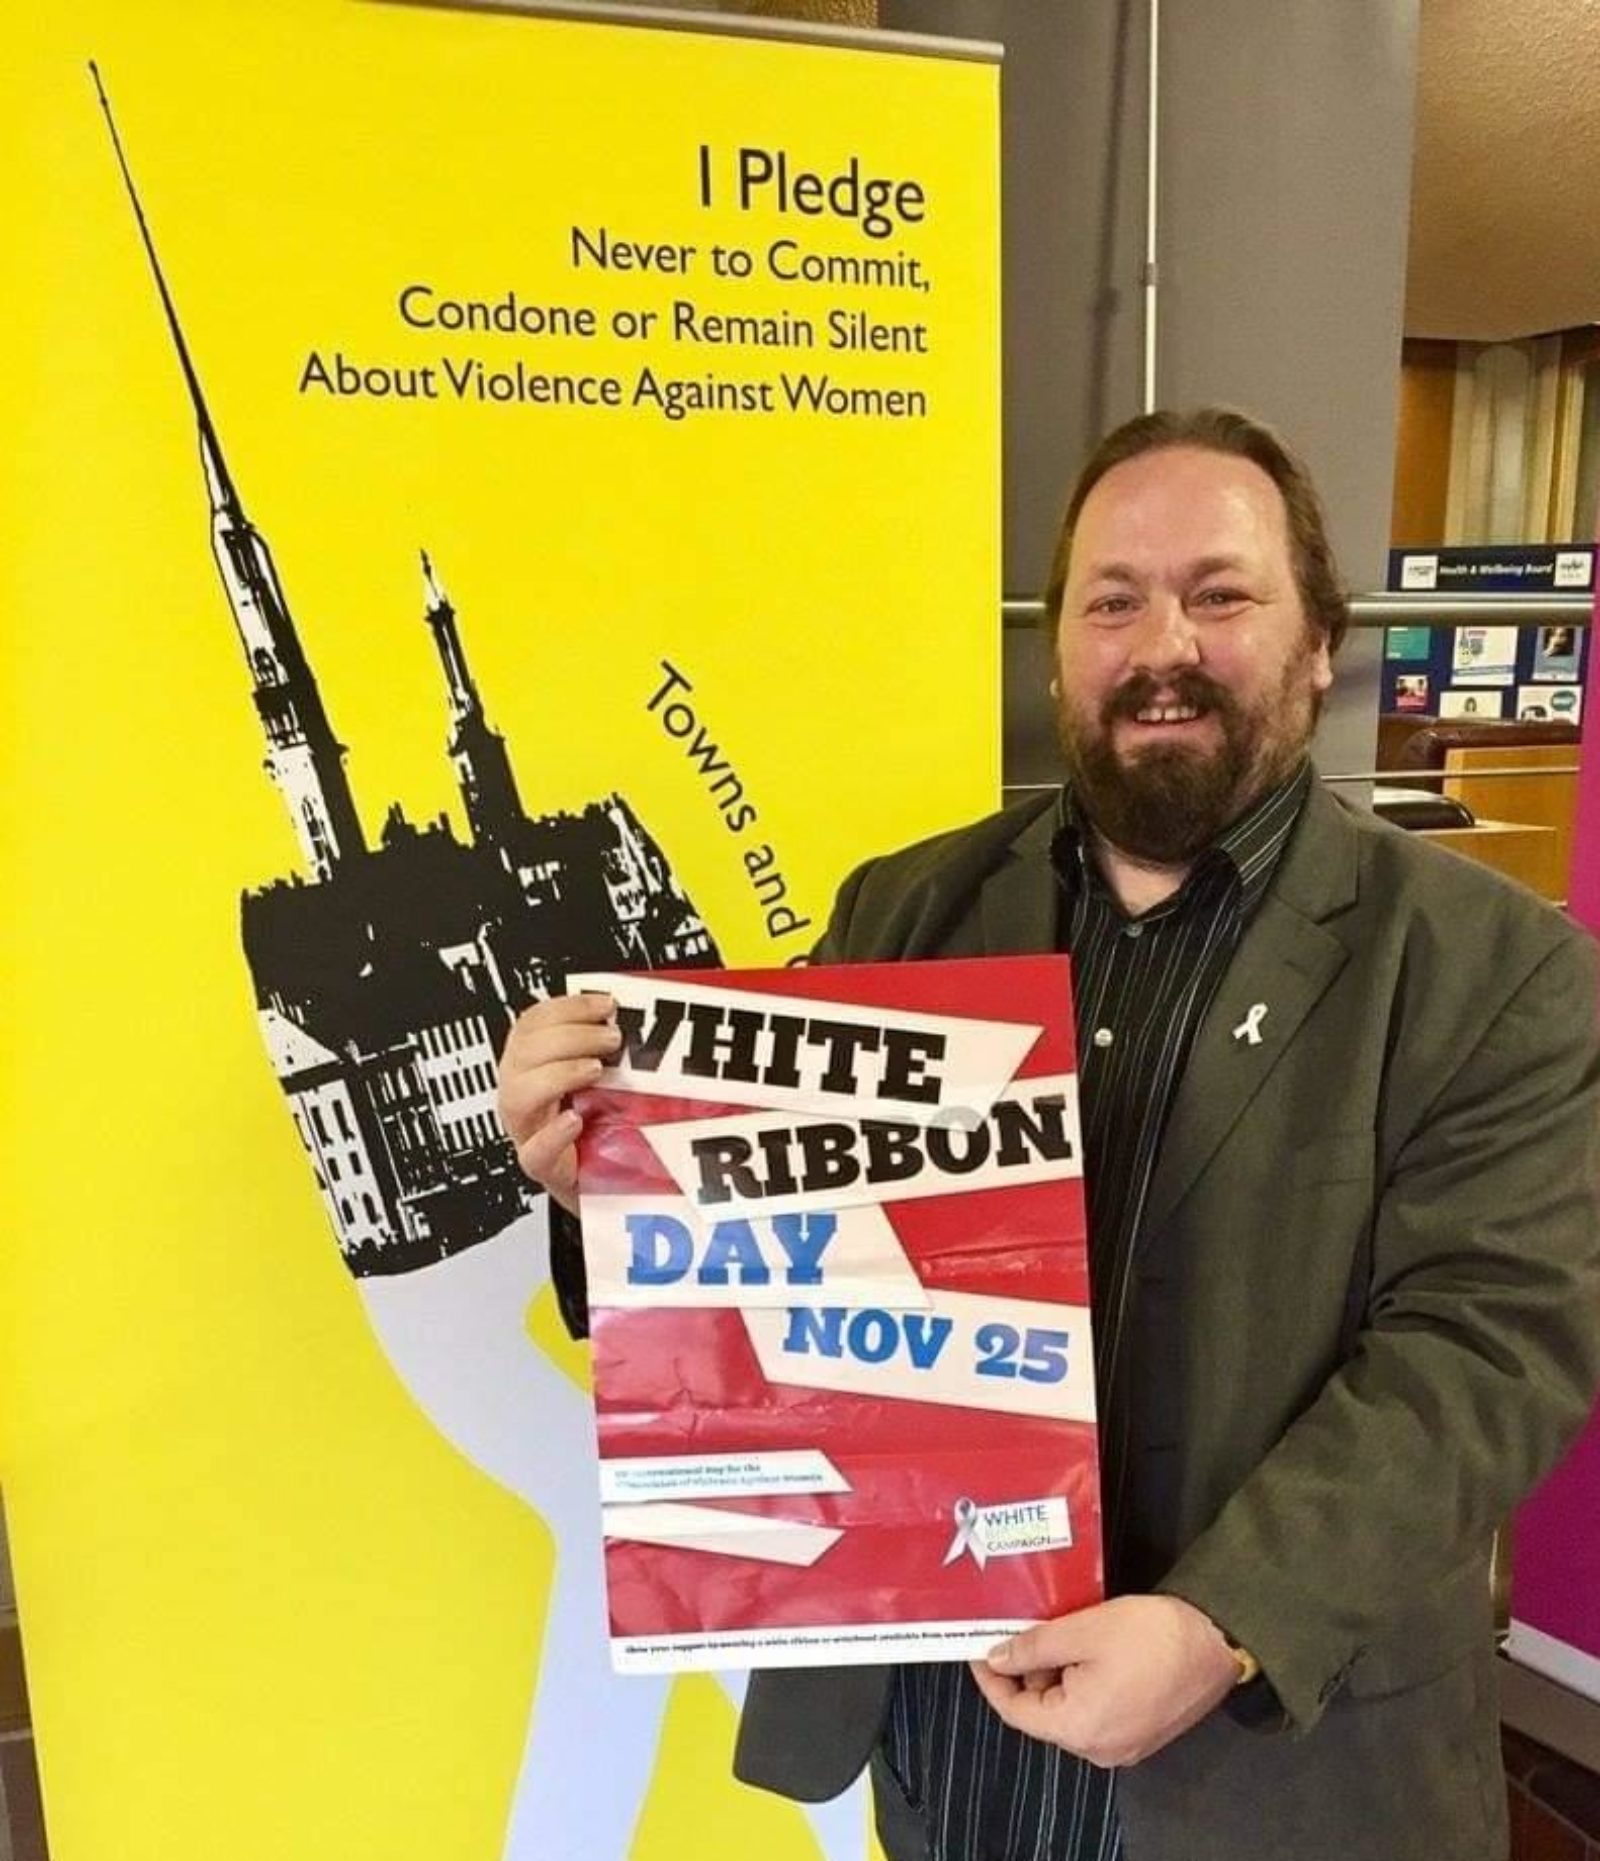 Cllr Maple supporting the White Ribbon campaign